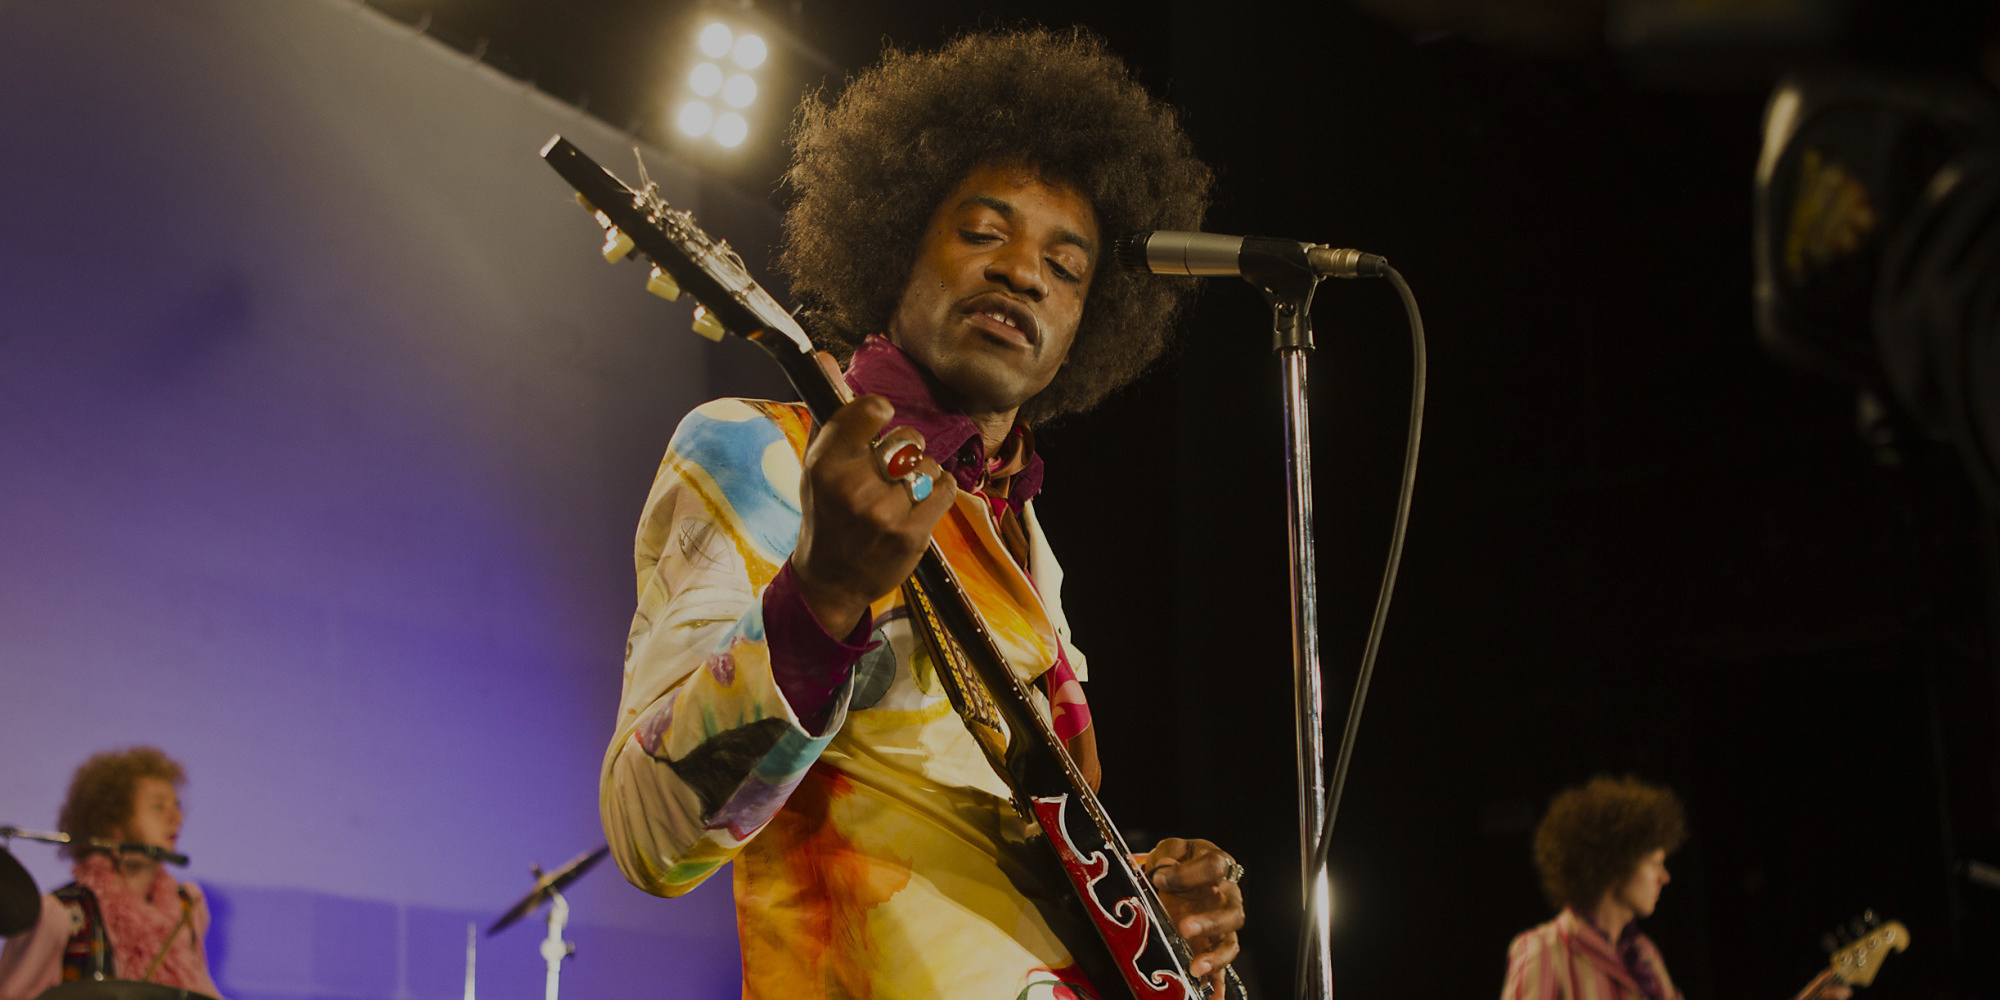 BLACK MOVIES ENTERTAINMENT PRÉSENTE “JIMI ALL IS BY MY SIDE”